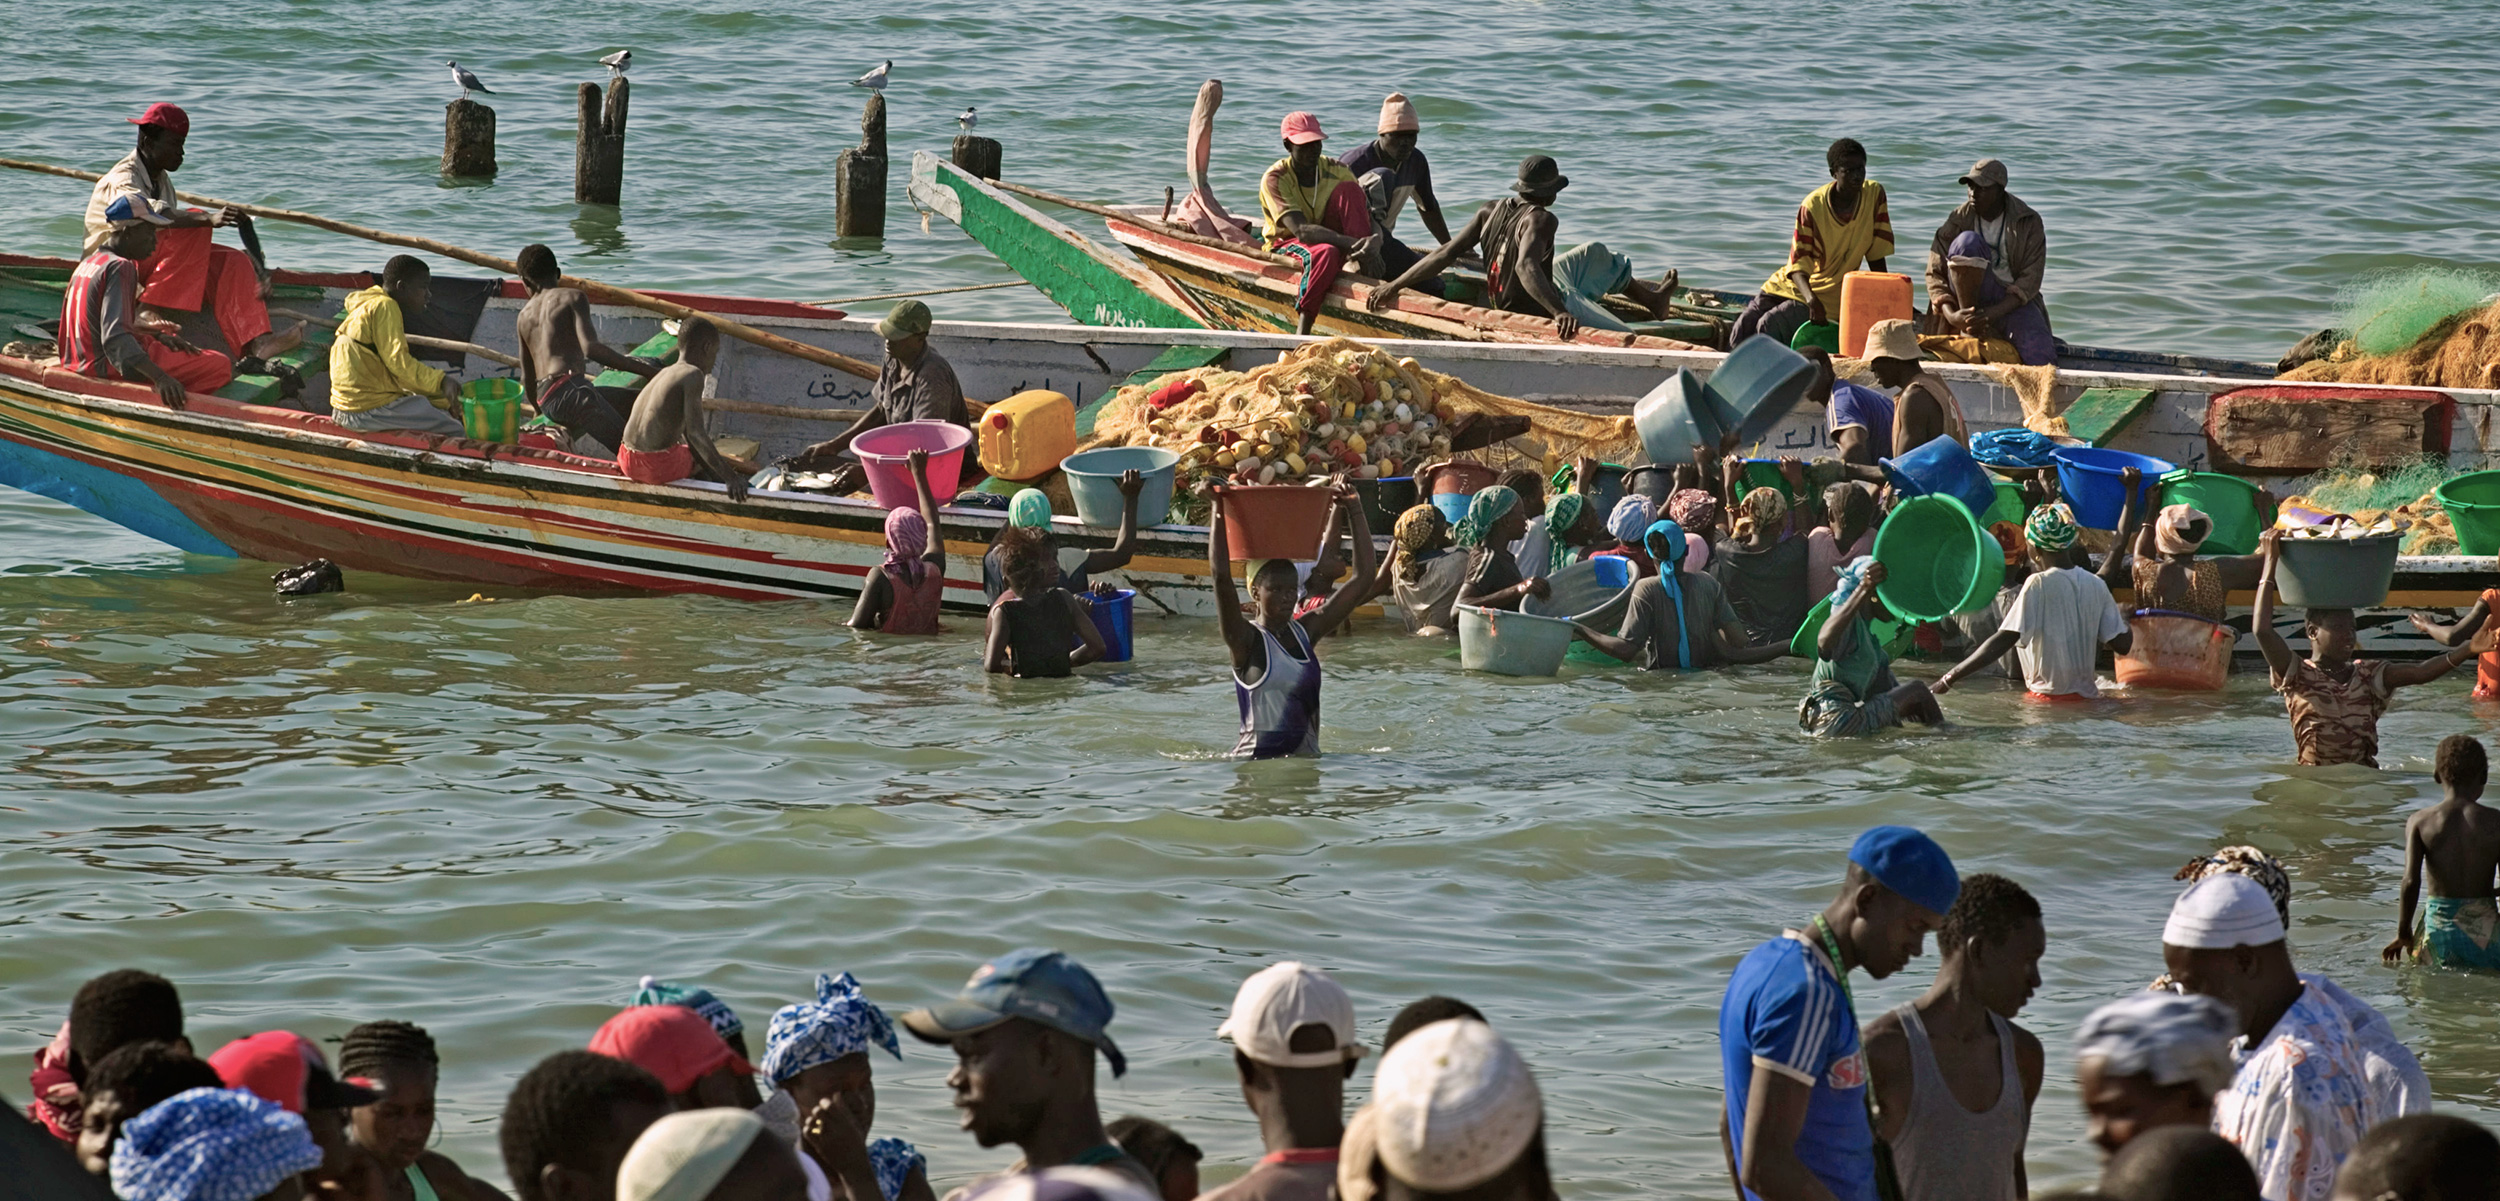 Gambian fishermen are hoping an eco-label will help secure their livelihood. Photo by Jon Hicks/Corbis